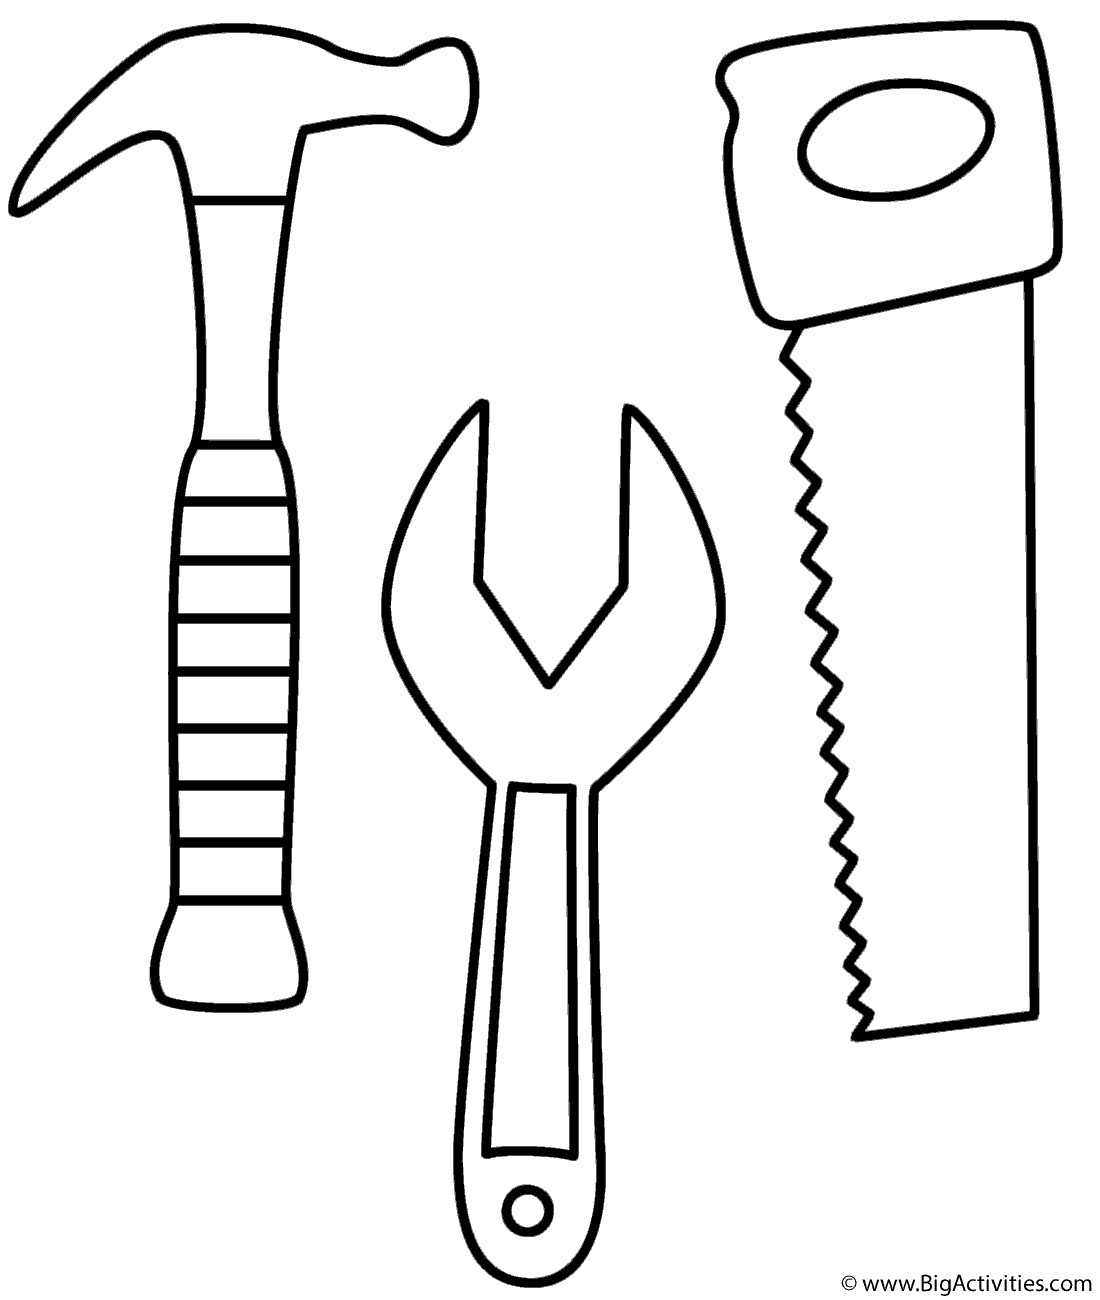 Tools Coloring Pages
 Hammer Saw and Wrench Coloring Page Tools